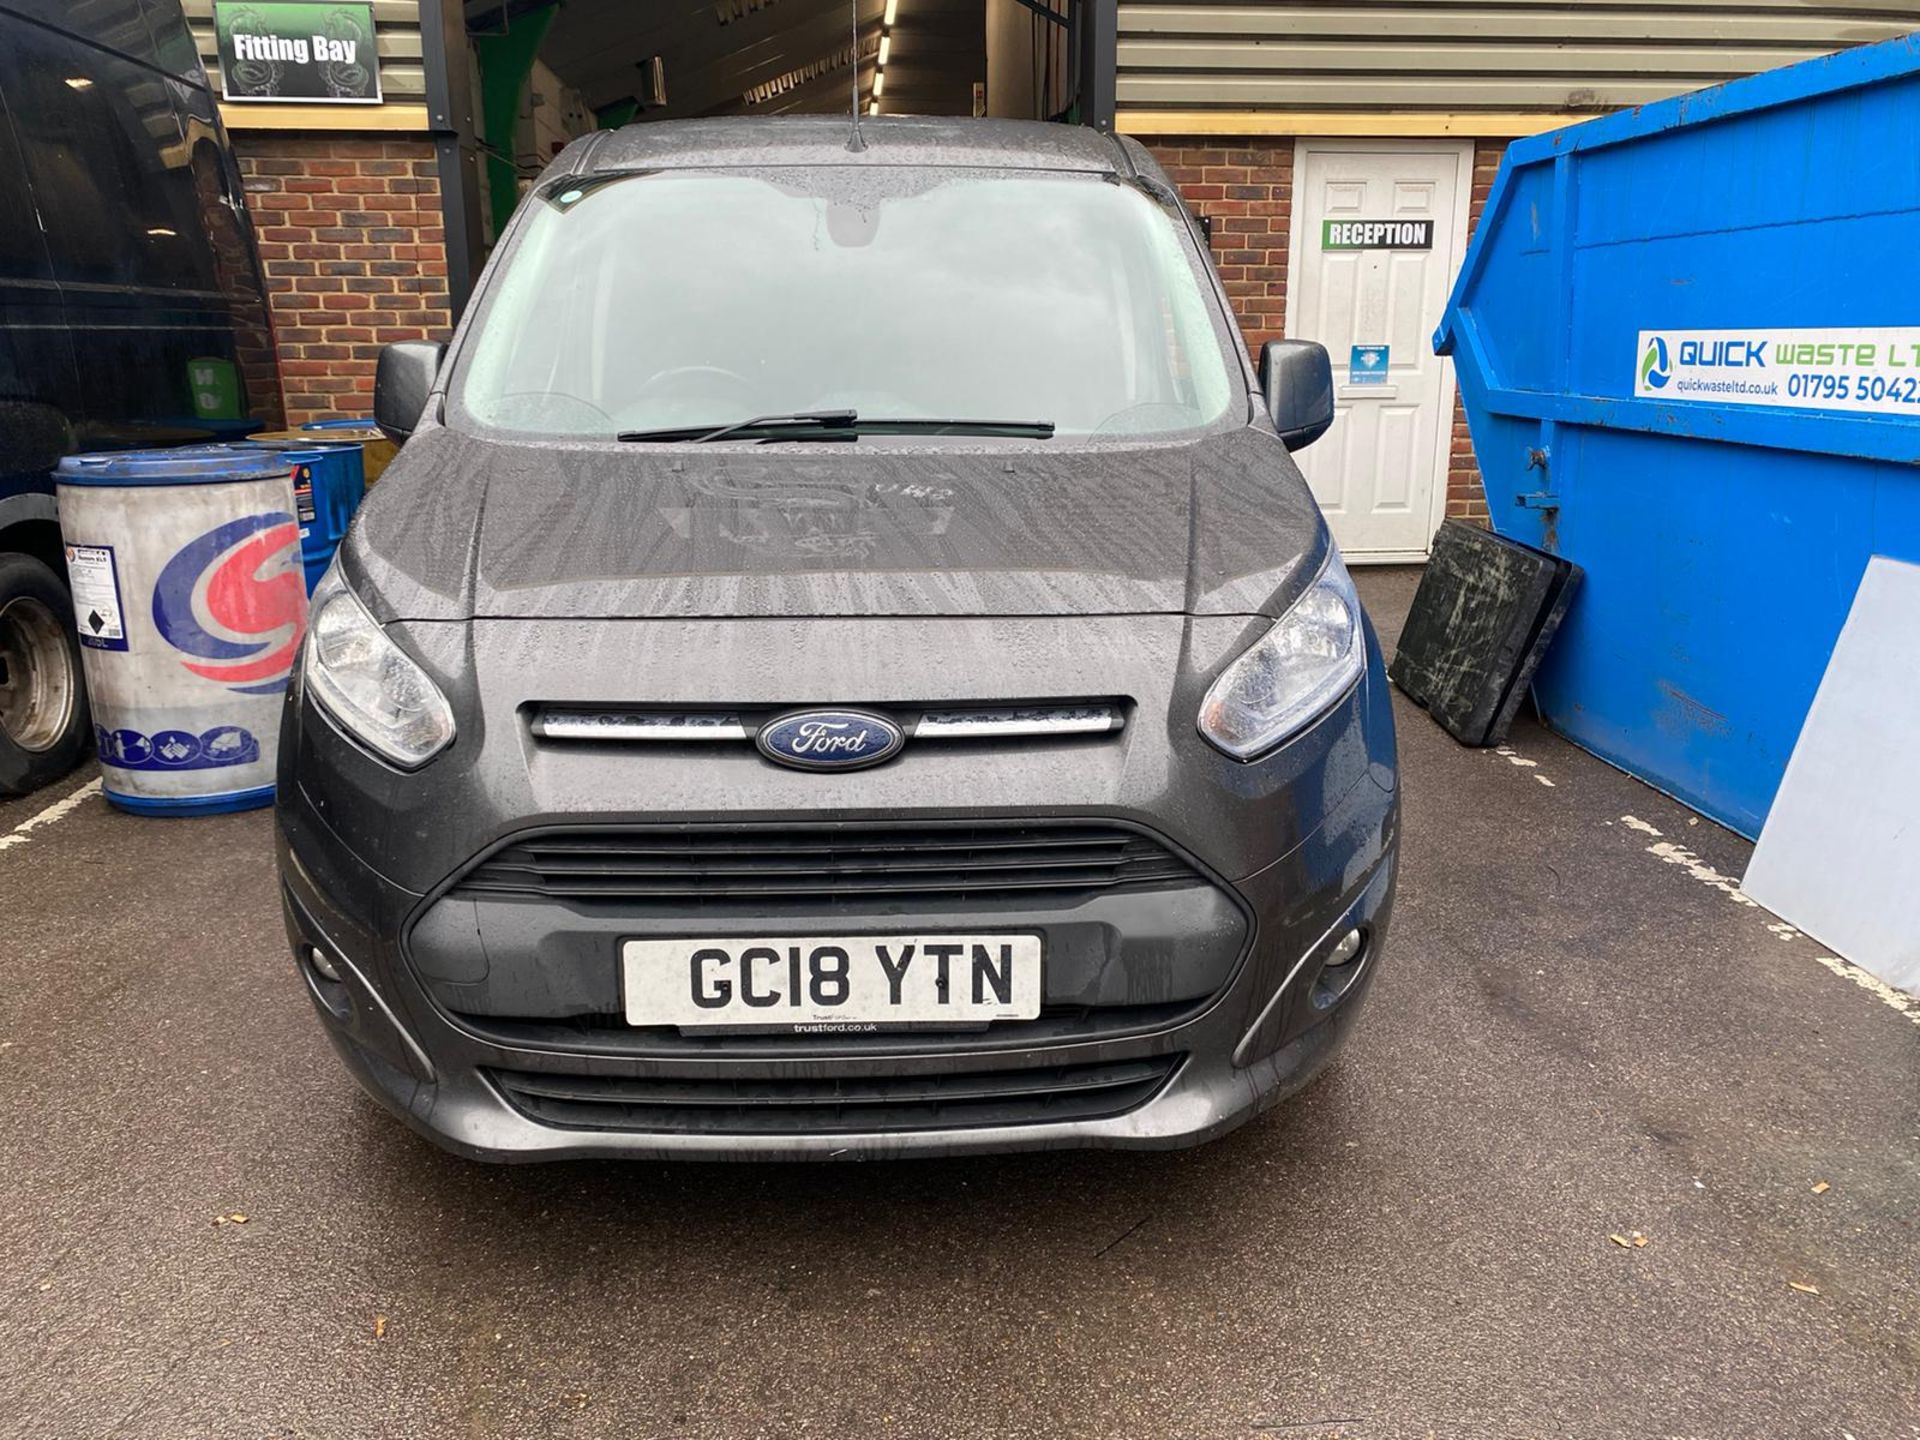 Ford Transit Connect 1.5 TDCi Van, Registration GC18 YTN, odometer reading 101,689 miles. Minor body - Image 6 of 10